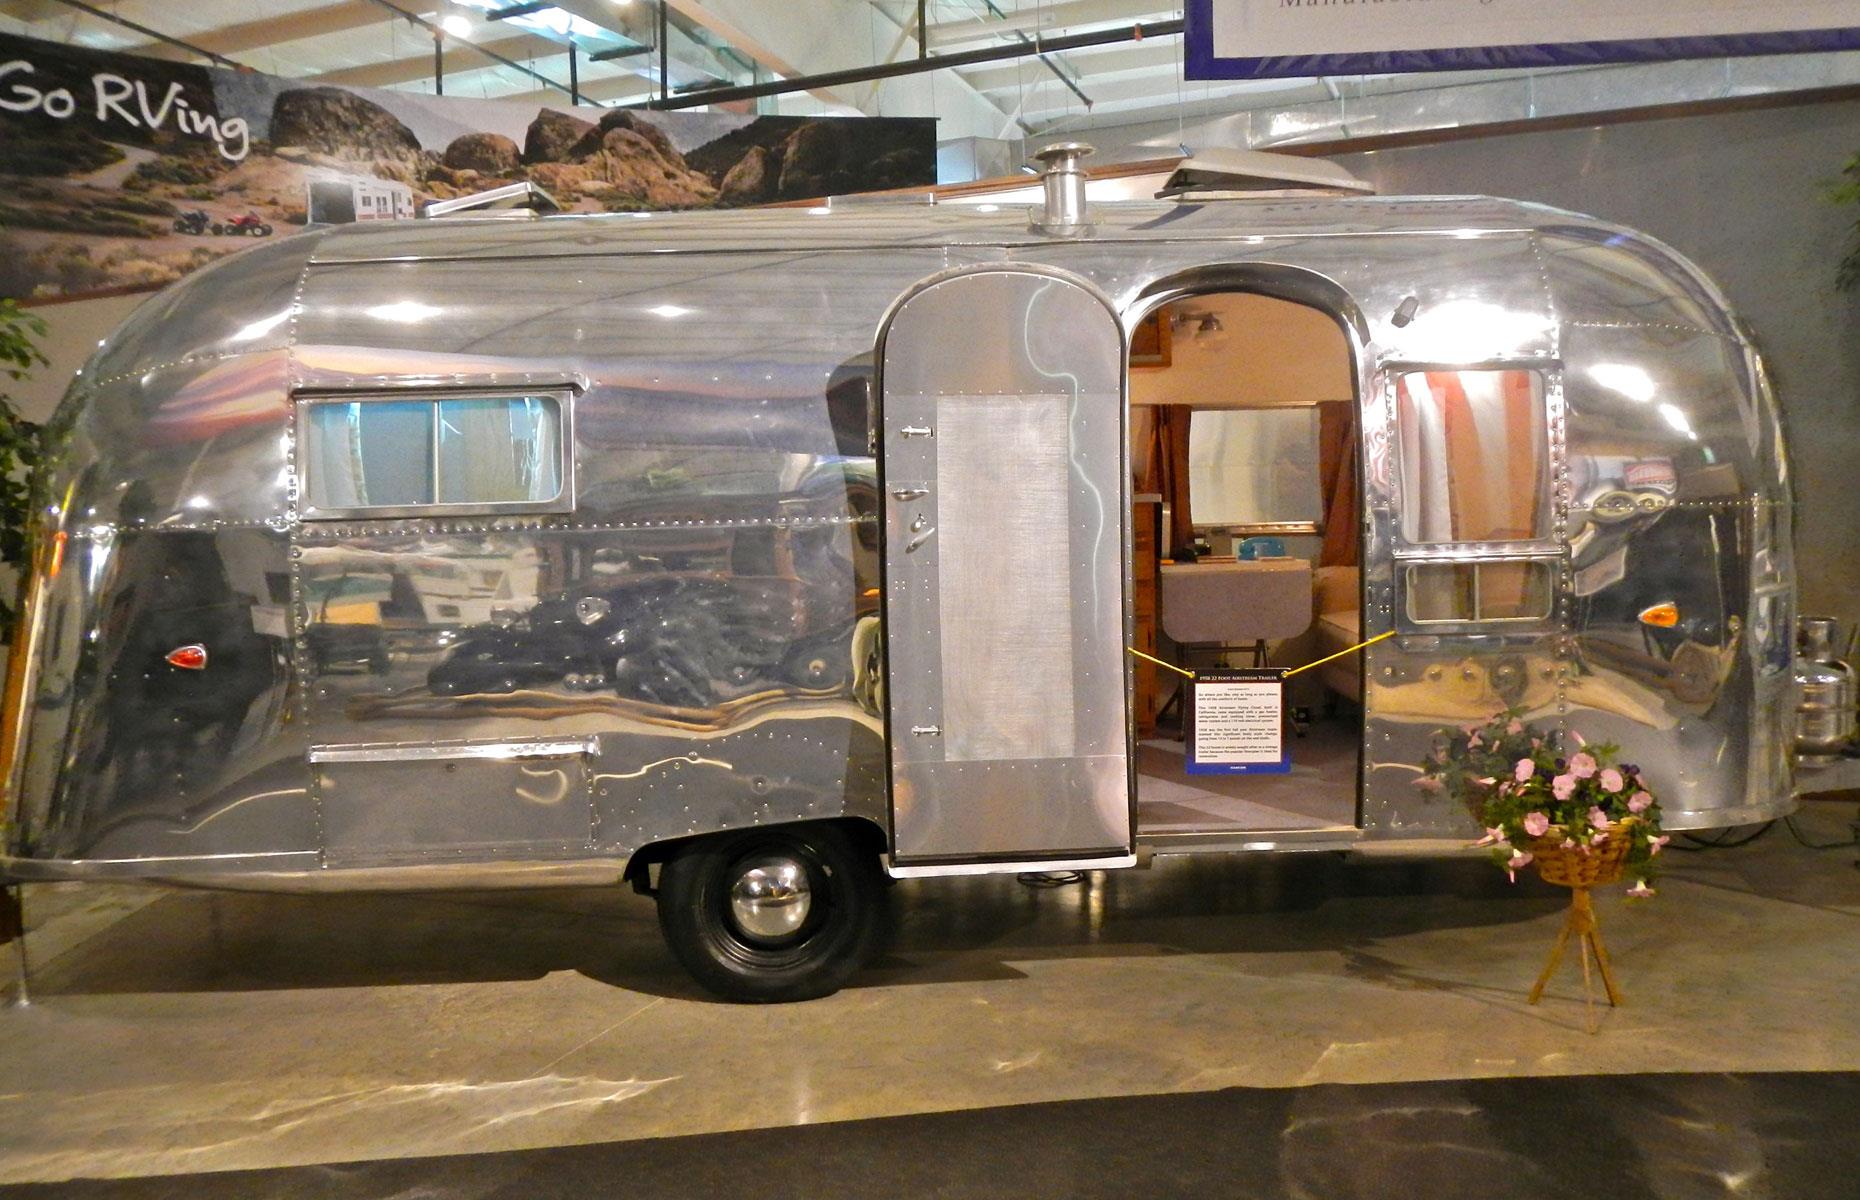 The firm outgrew its Californian headquarters by the 1950s and in 1952 Byam opened a larger factory in Ohio. With sales buoyant throughout the decade, Byam further refined his RV line-up and launched "the world's first self-contained trailer" Airstream International in 1958. The 150,000-square-foot (46,000sqm) Ohio factory is still operating today, with new models coming off the production line every few years.